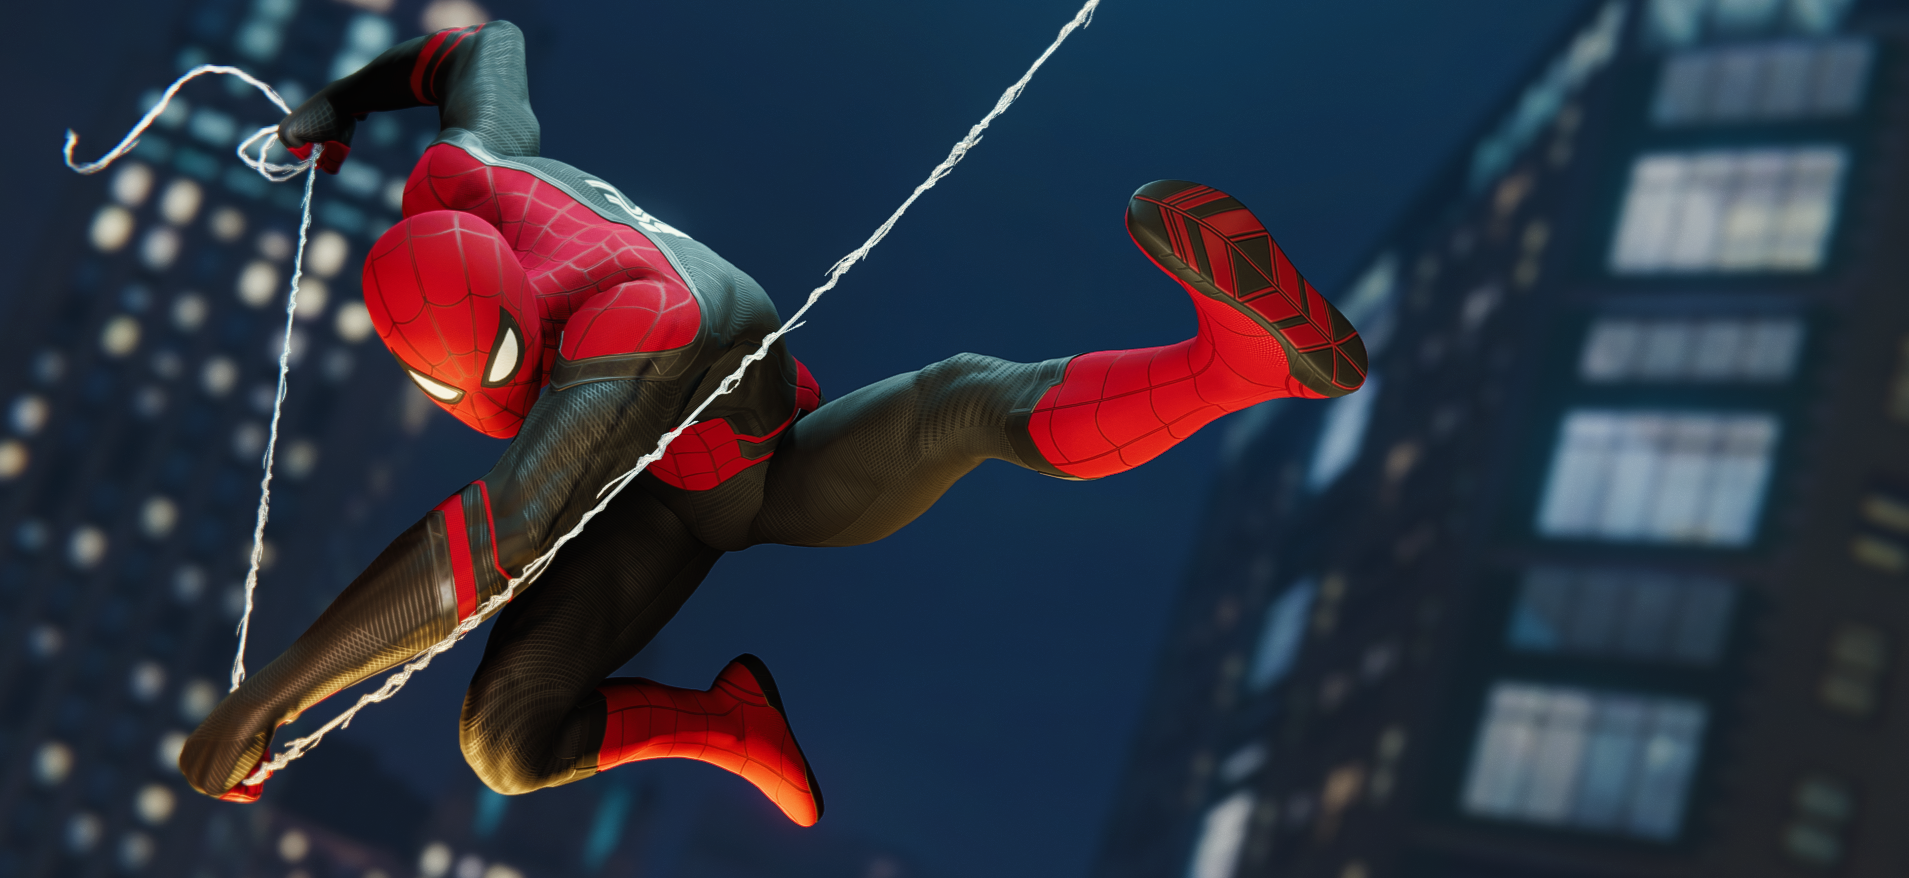 Some Spiderman Remastered Pc Wallpaper Material R Spidermanps4